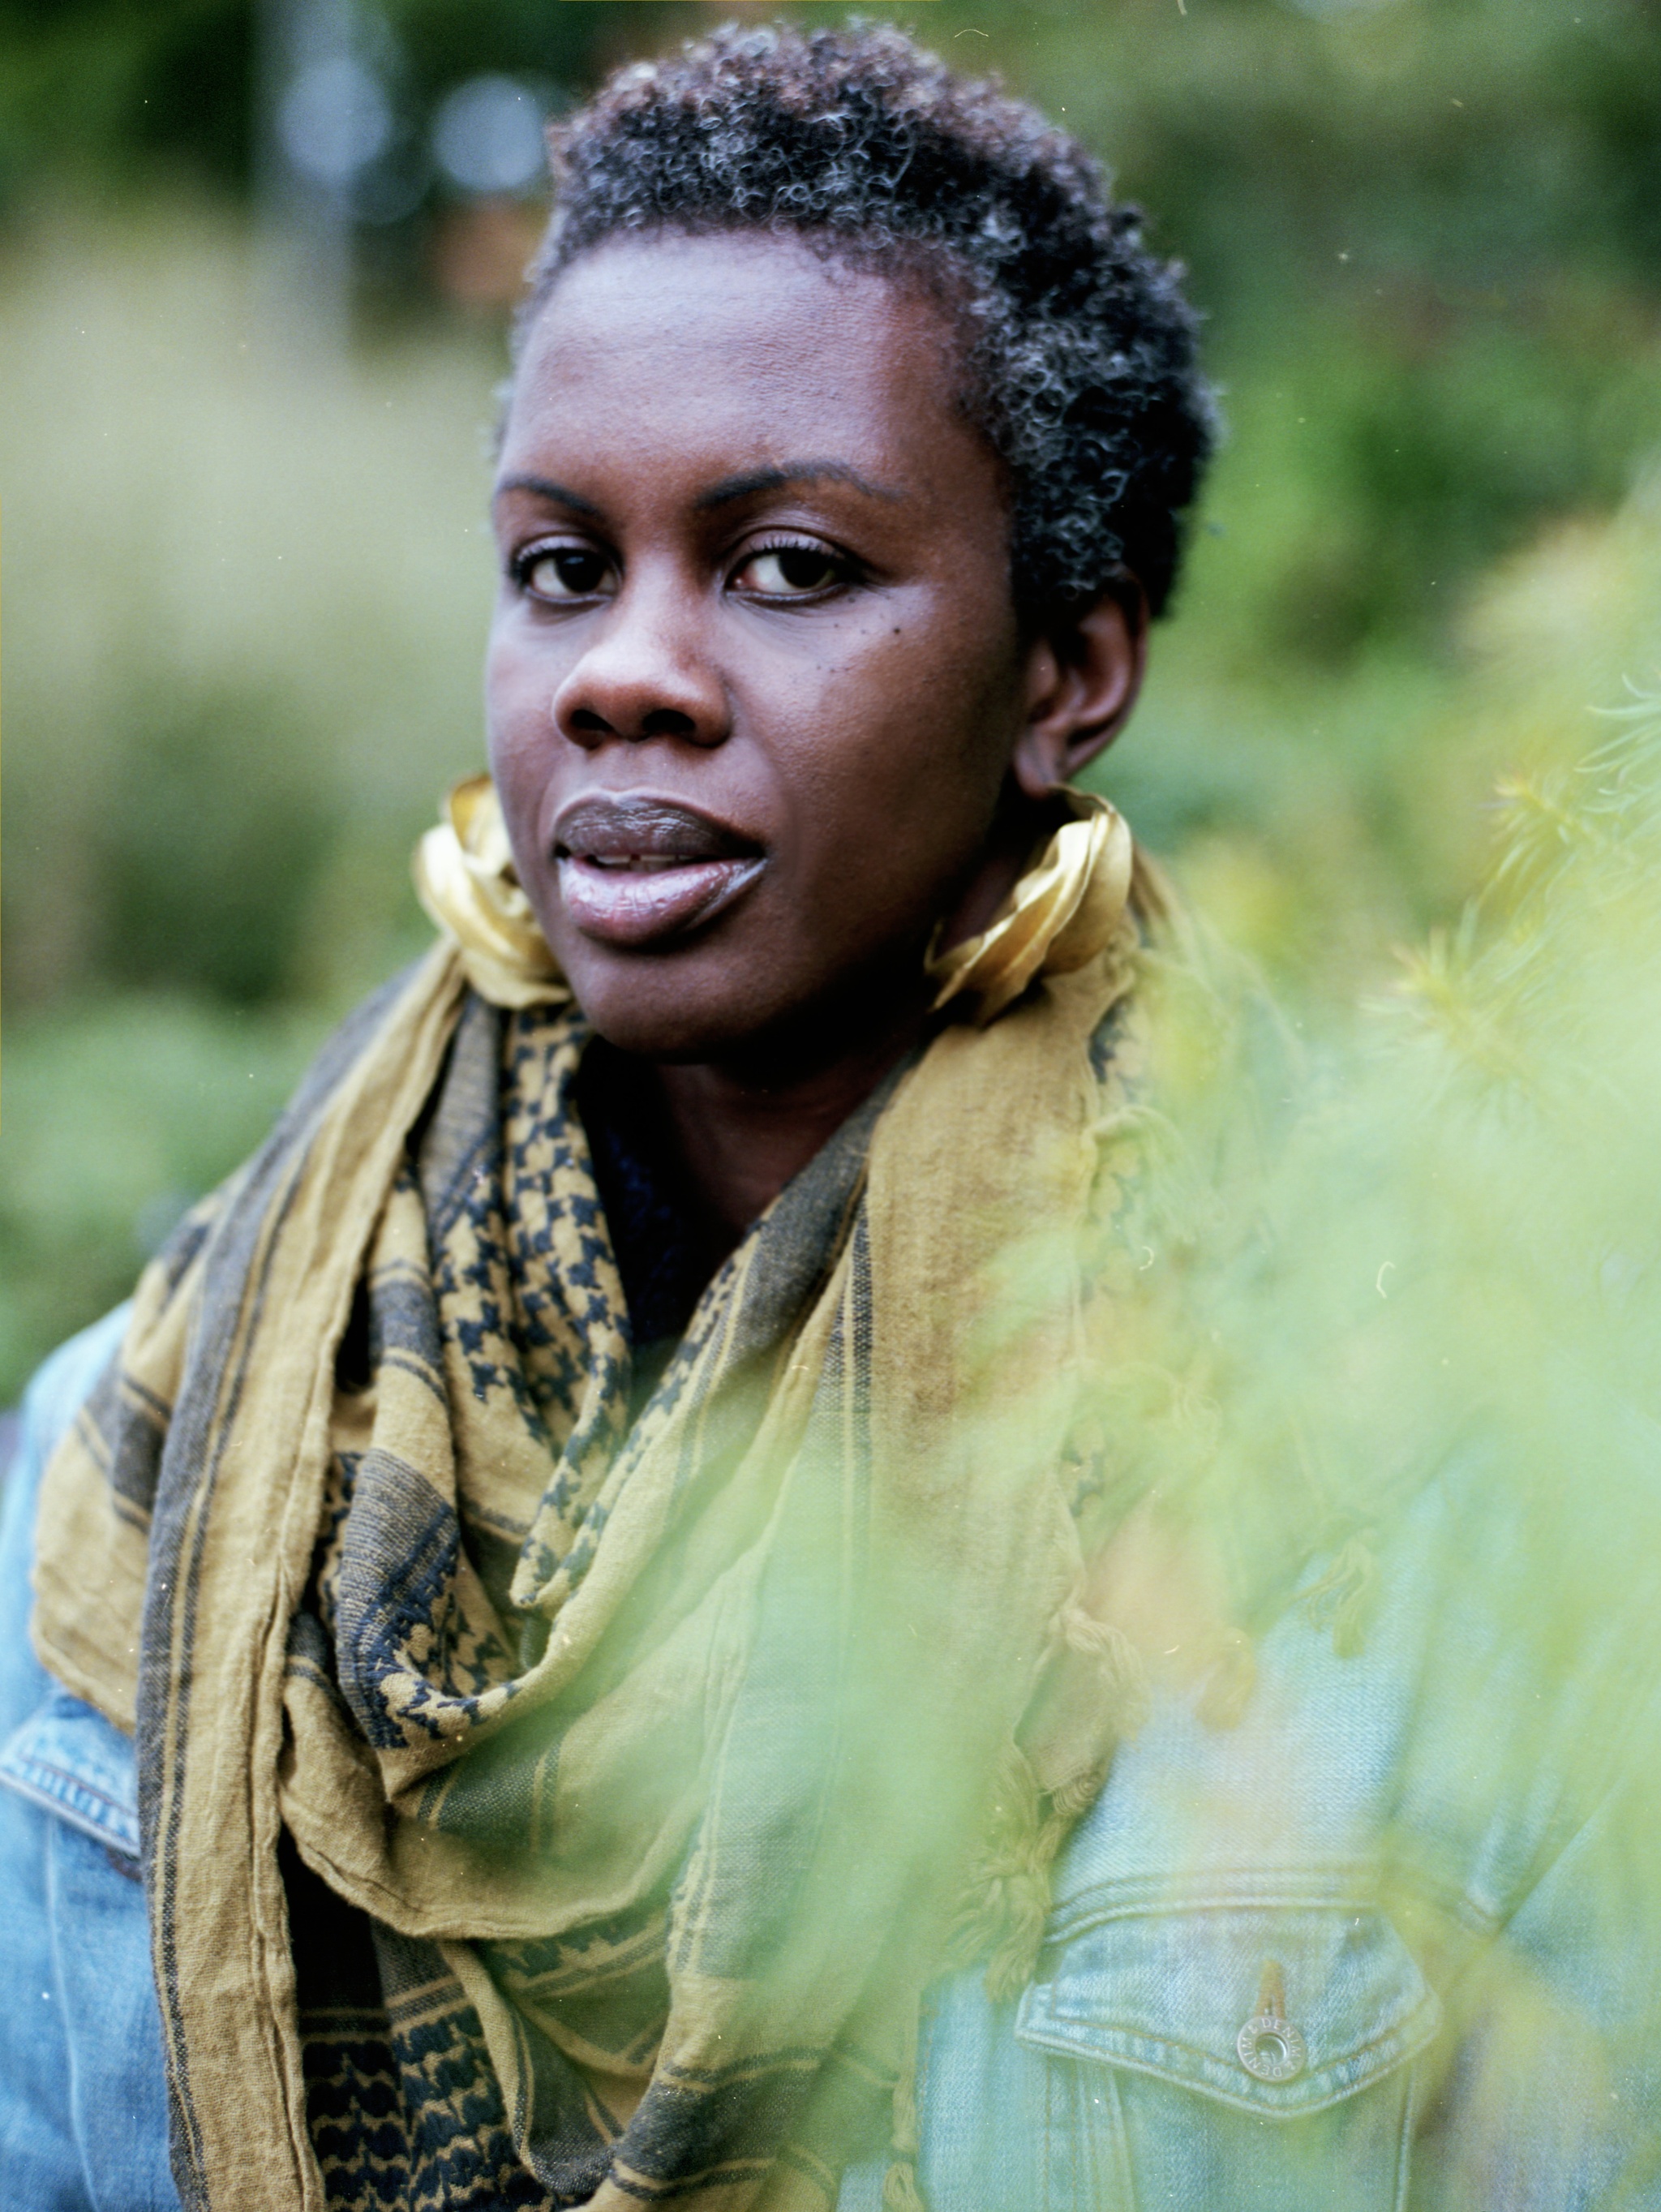 A portrait of Charlotte Brathwaite seen in three quarters view surrounded by trees and green branches